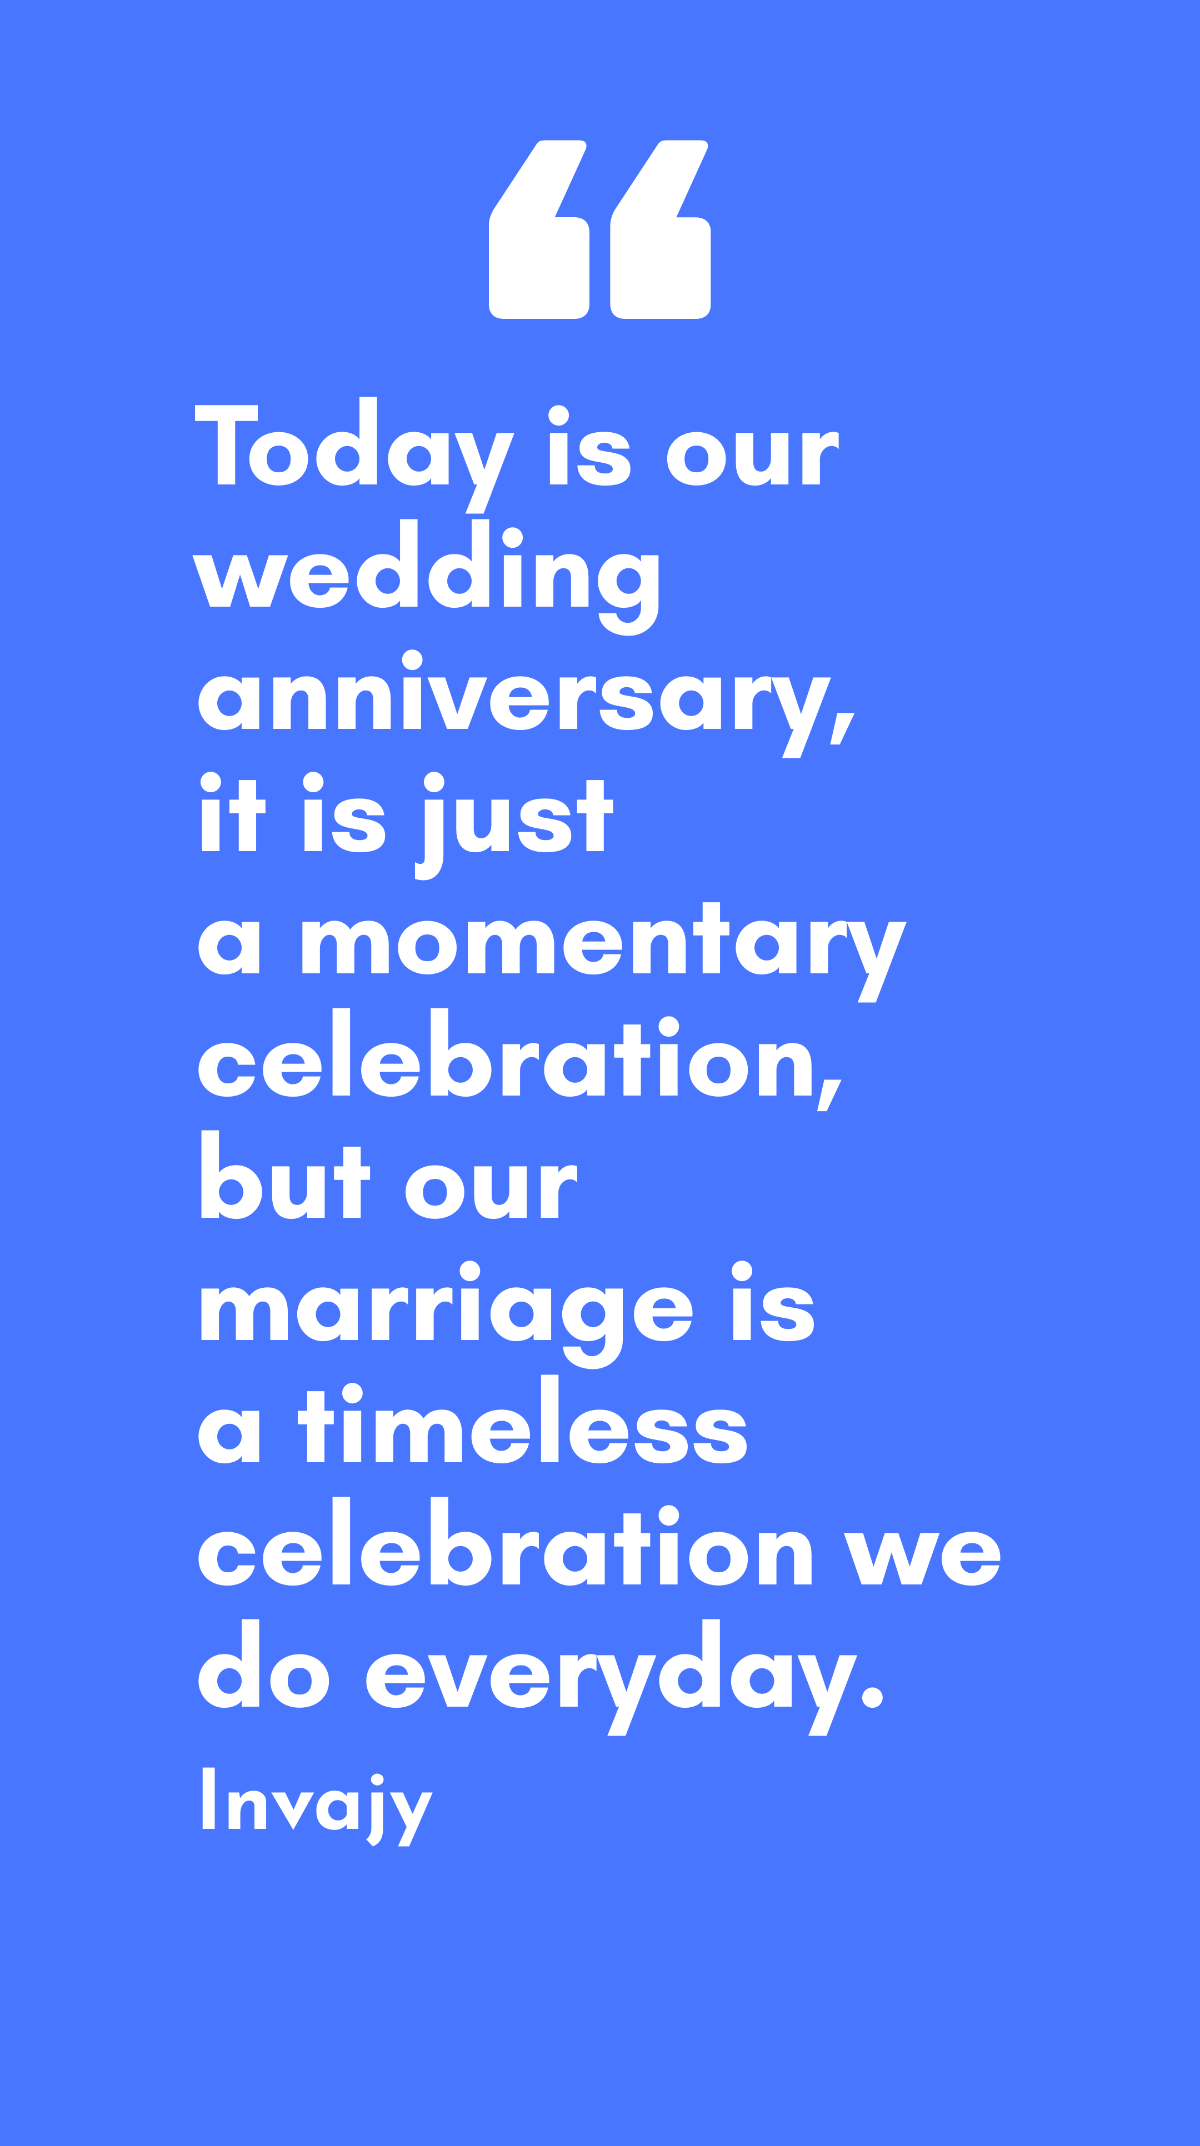 Free Invajy - Today is our wedding anniversary, it is just a momentary celebration, but our marriage is a timeless celebration we do everyday. Template